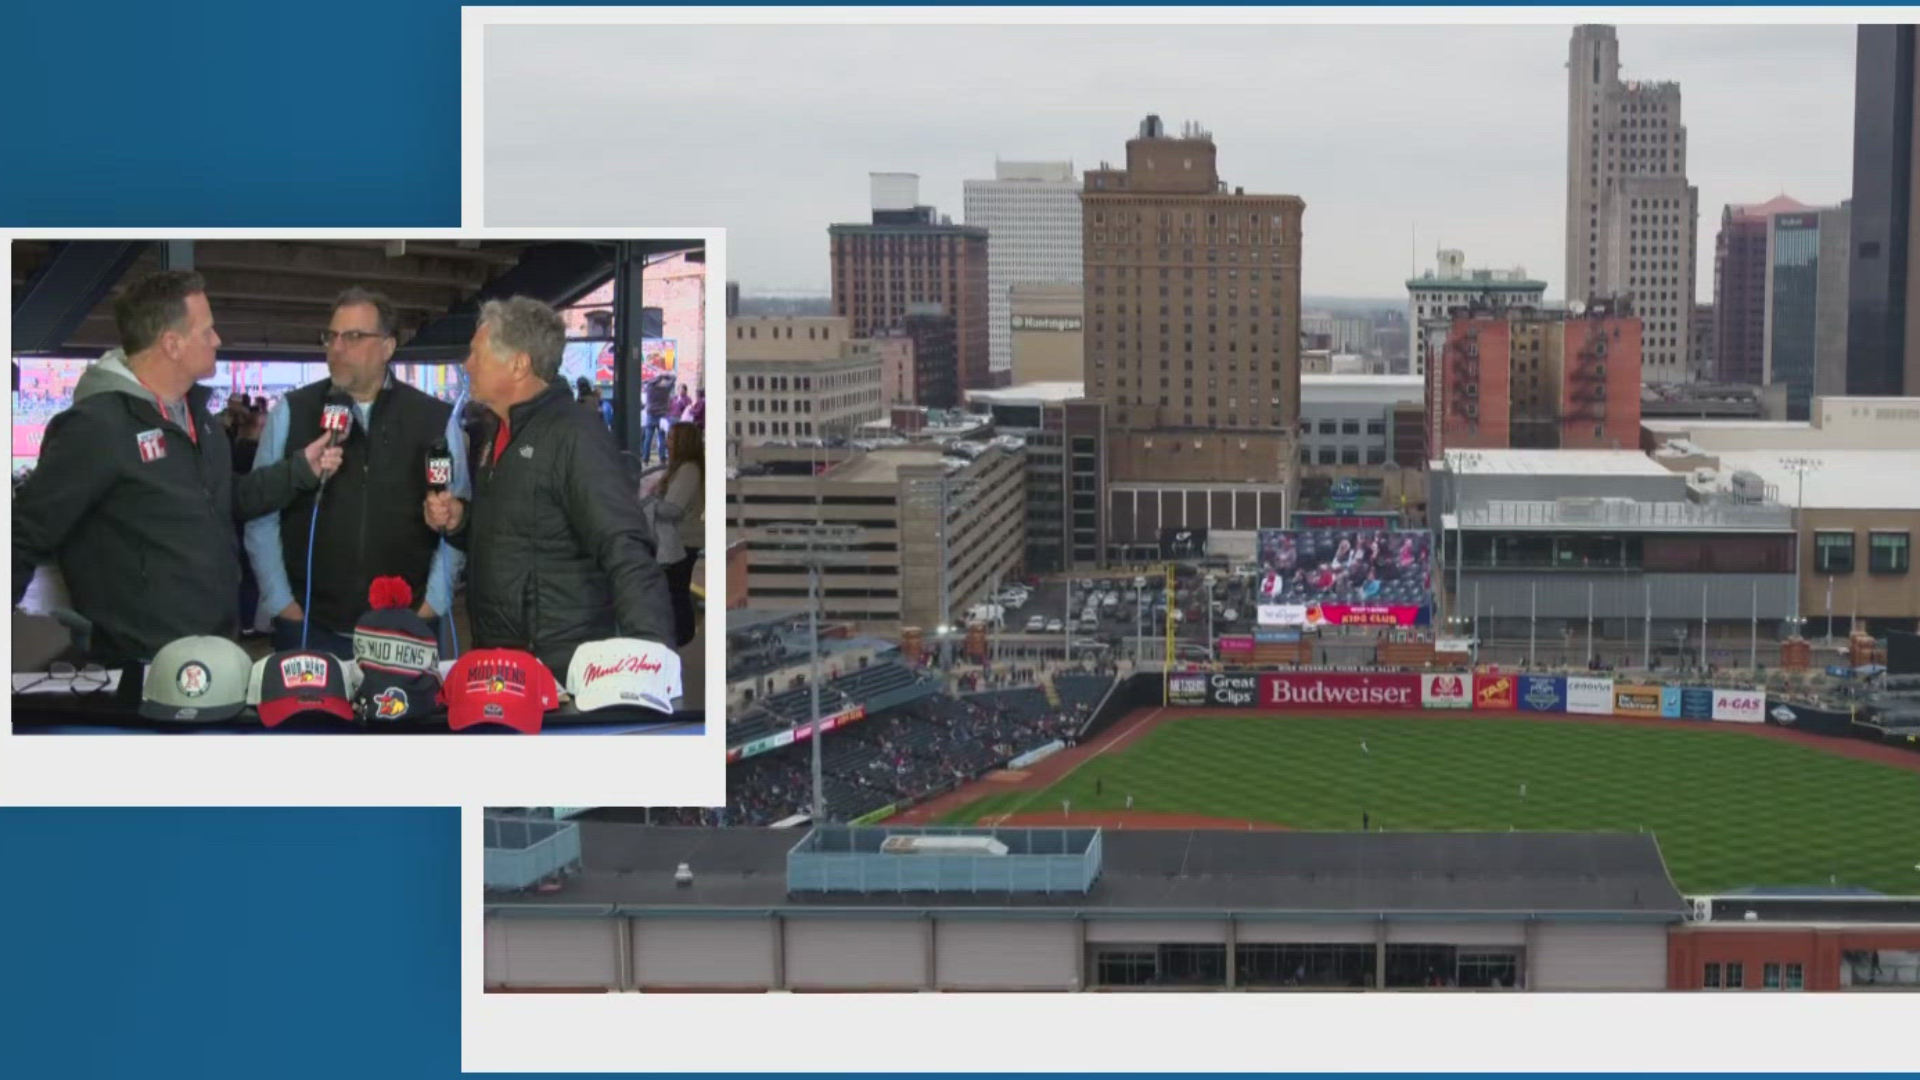 It has been 21 years since Fifth Third Field opened in downtown Toledo. Much has changed and president and CEO Joe Napoli talks past, present and future.